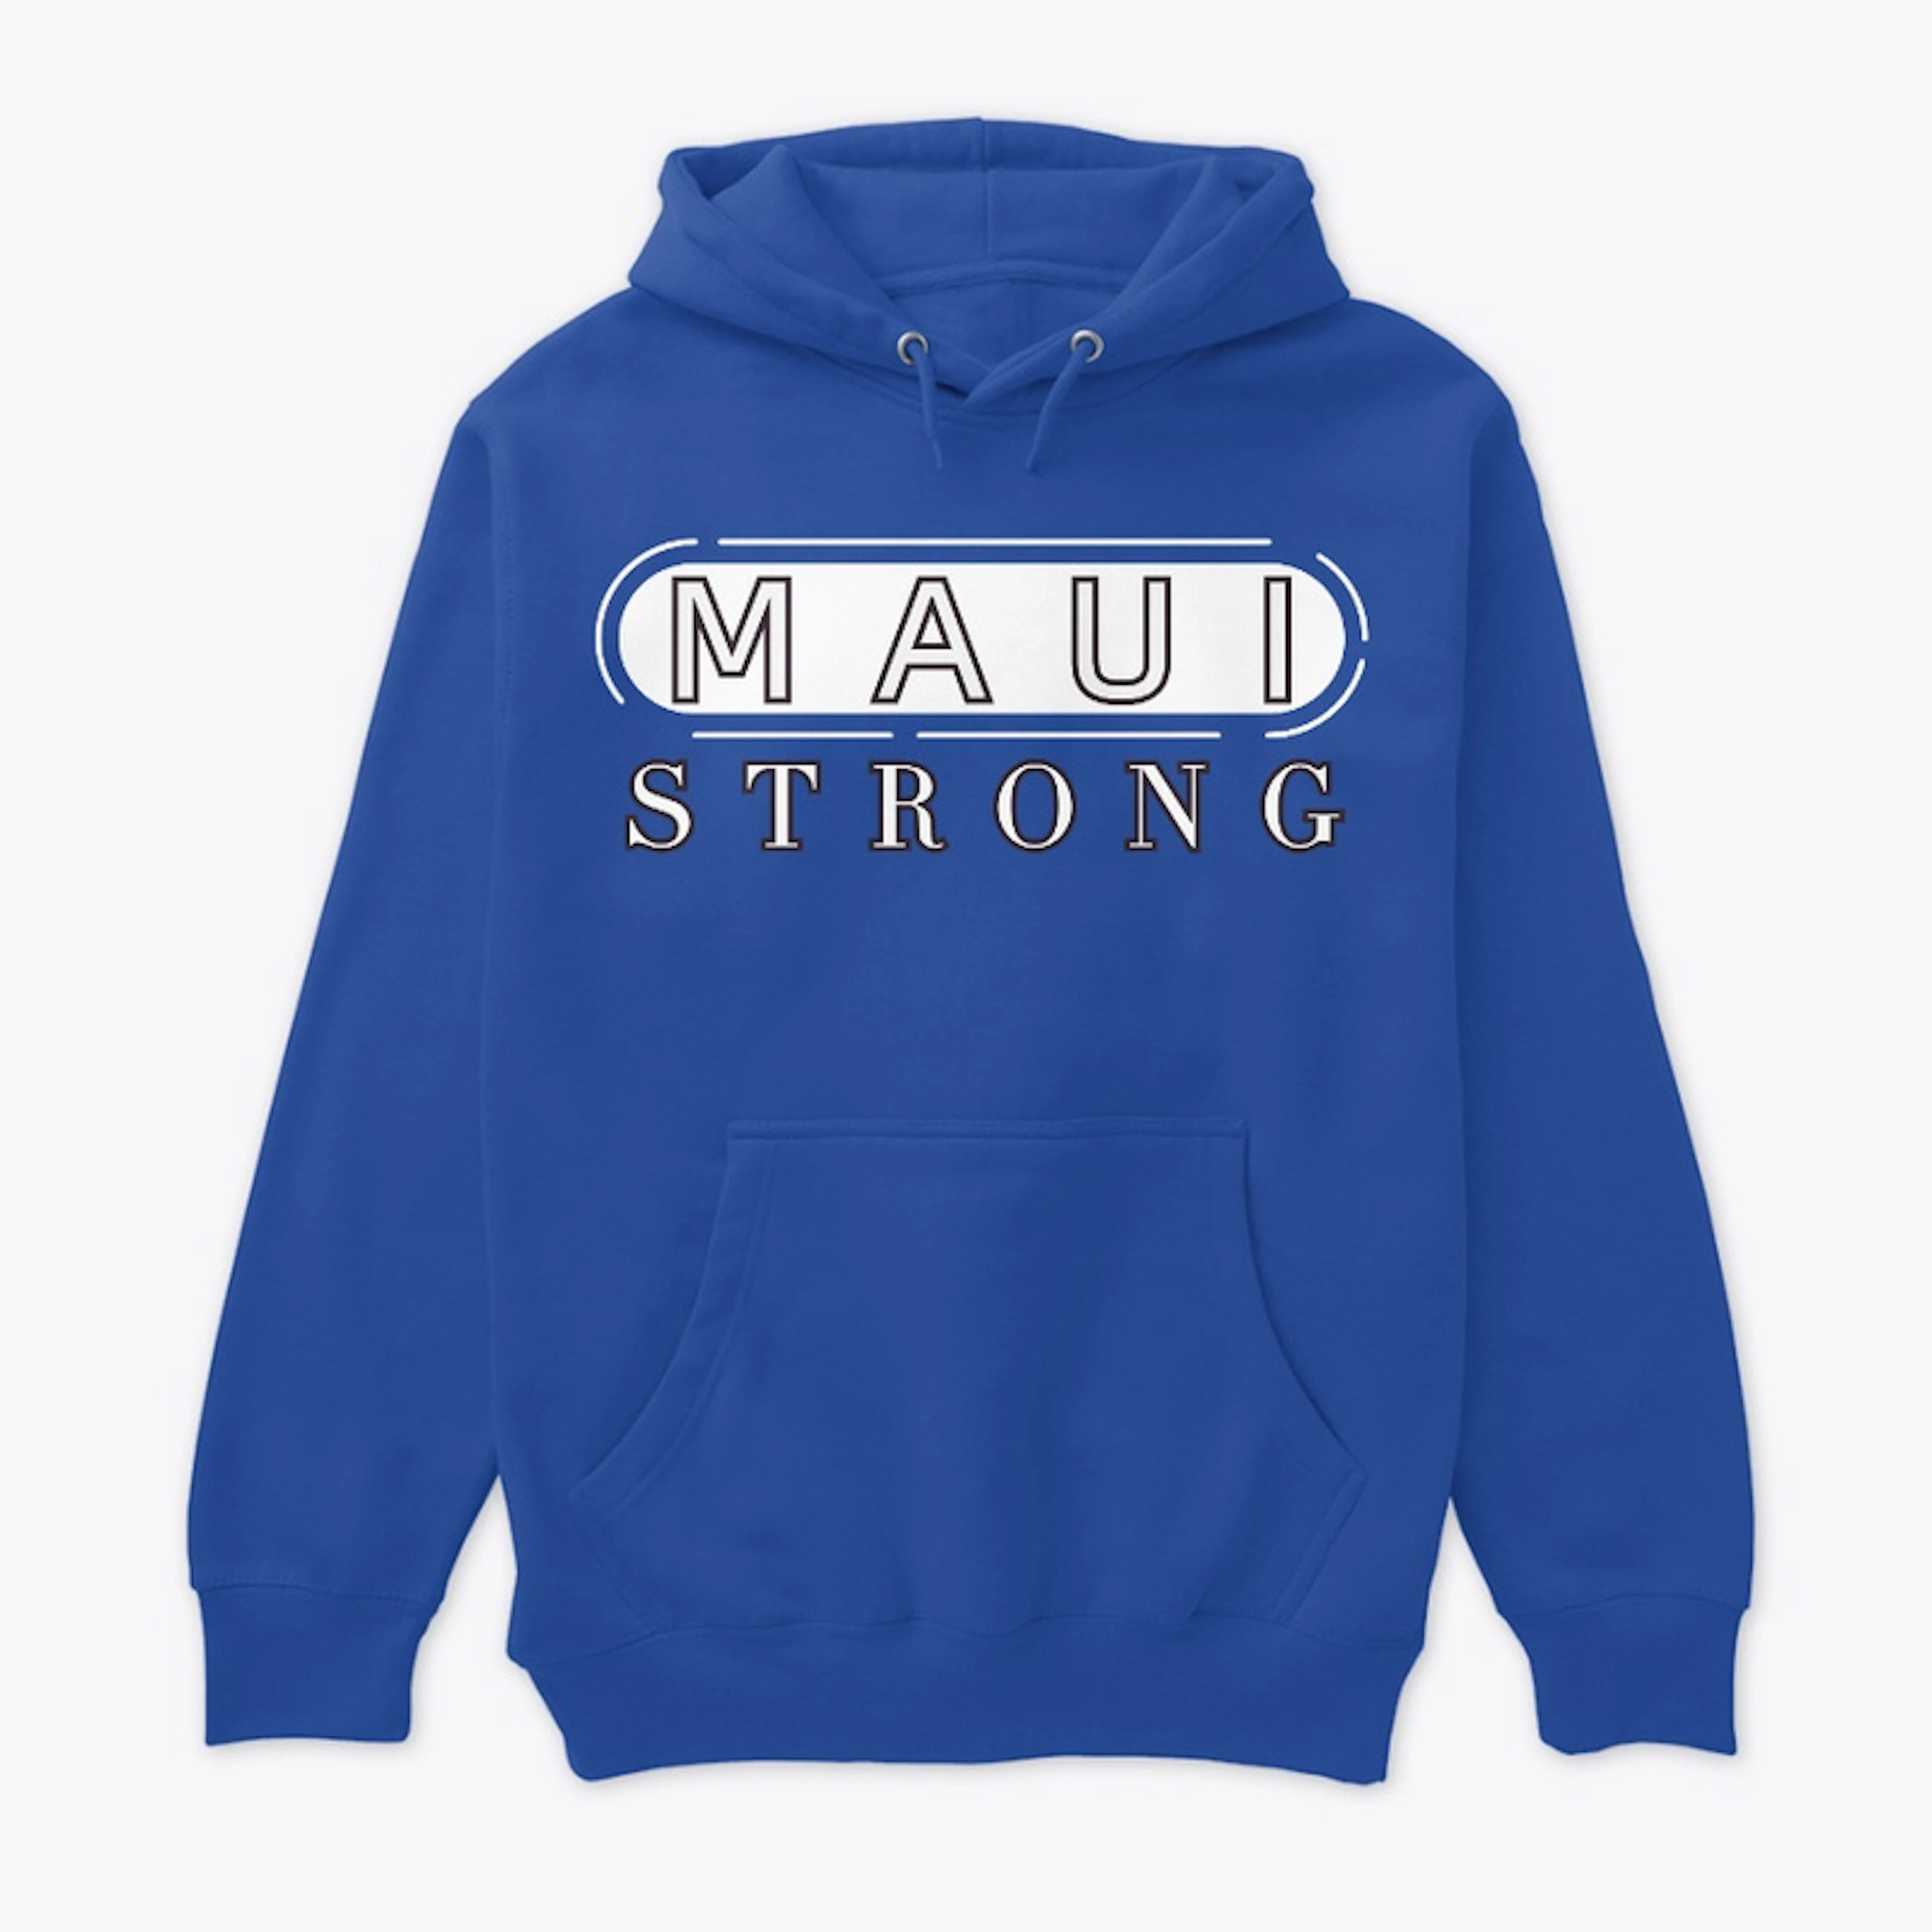 Maui Strong Apparel - Maui is Strong!